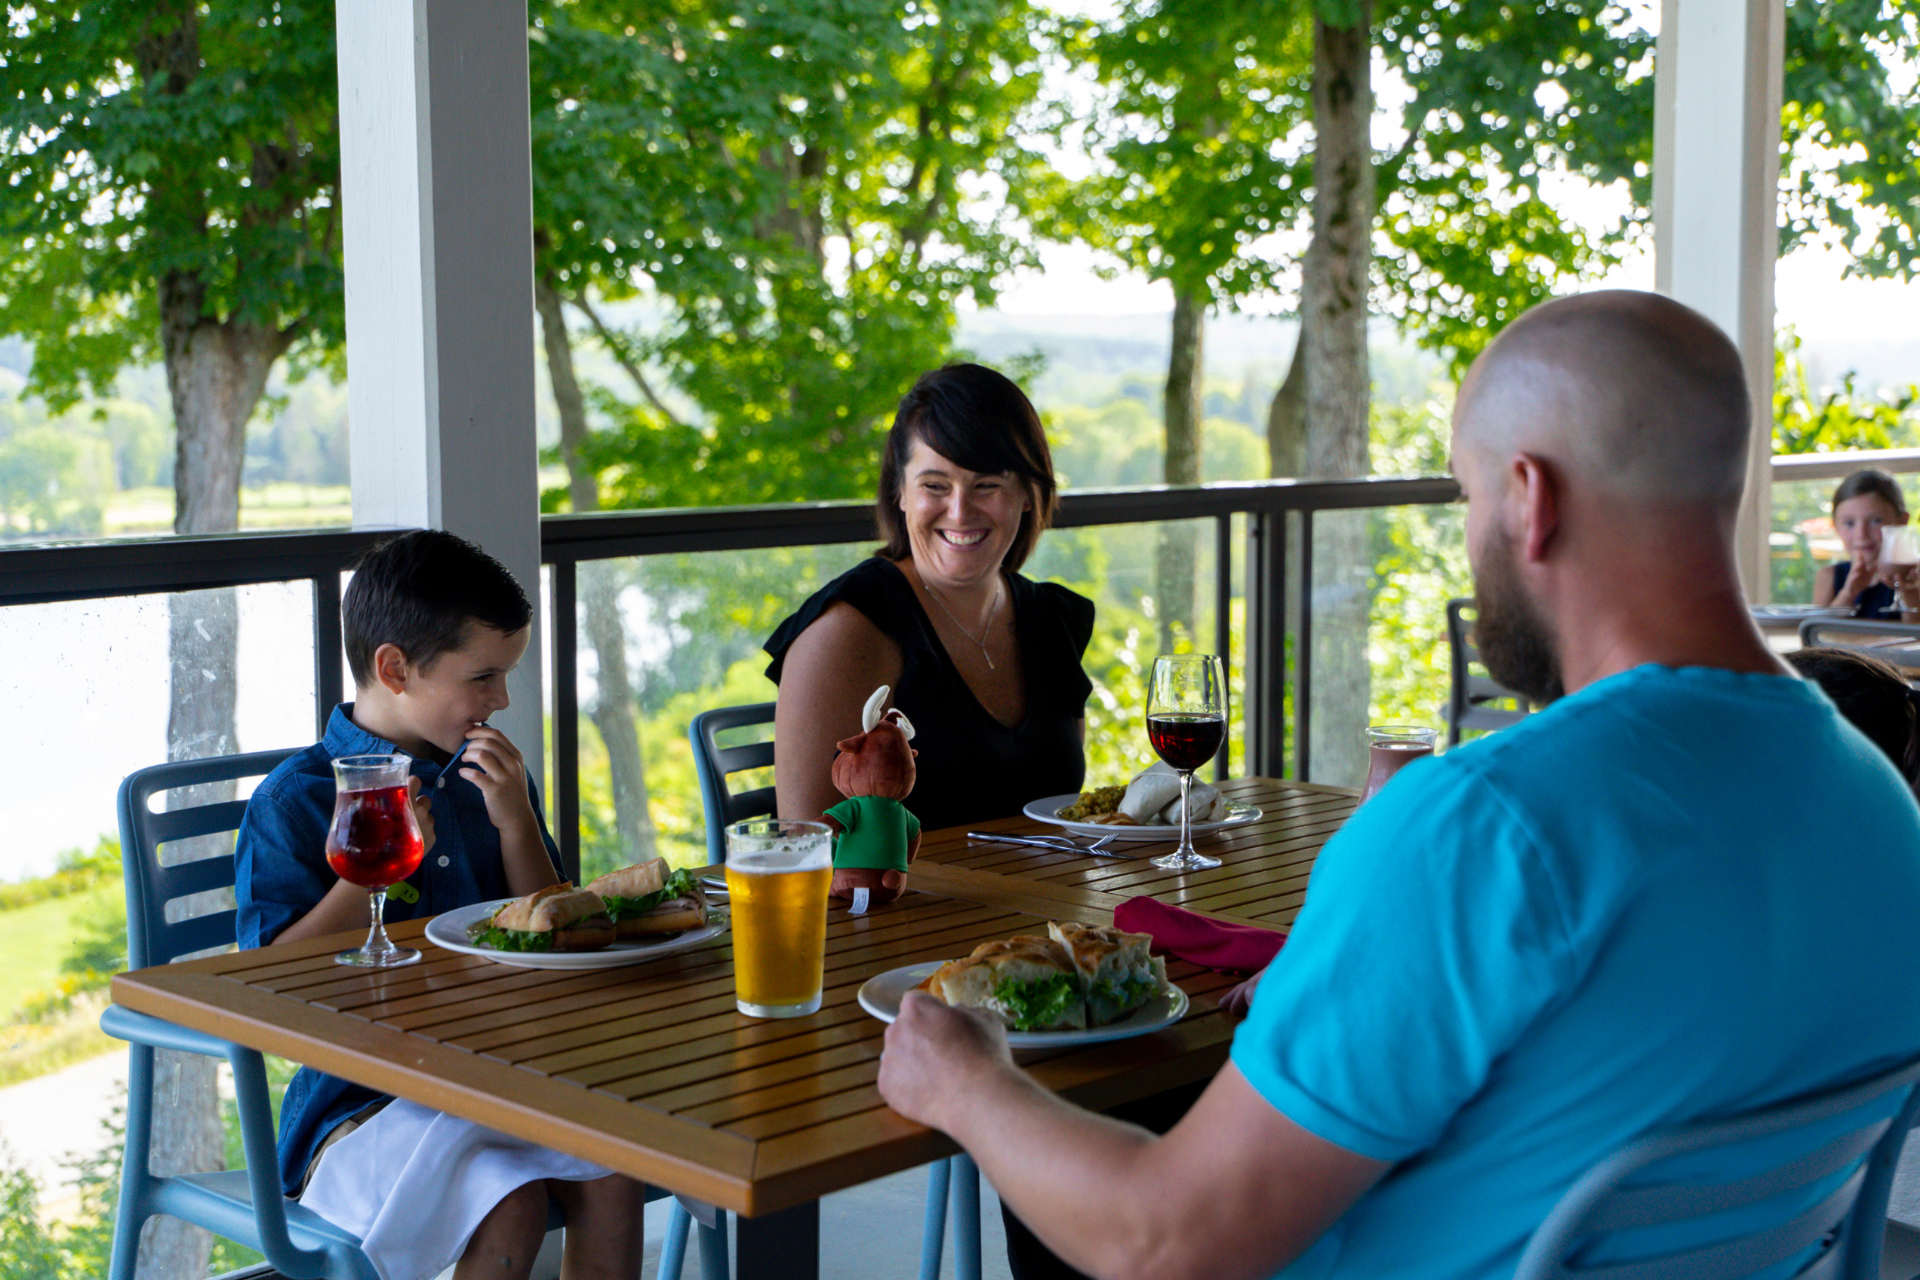 Family of three sitting on a patio table with trees in the distance